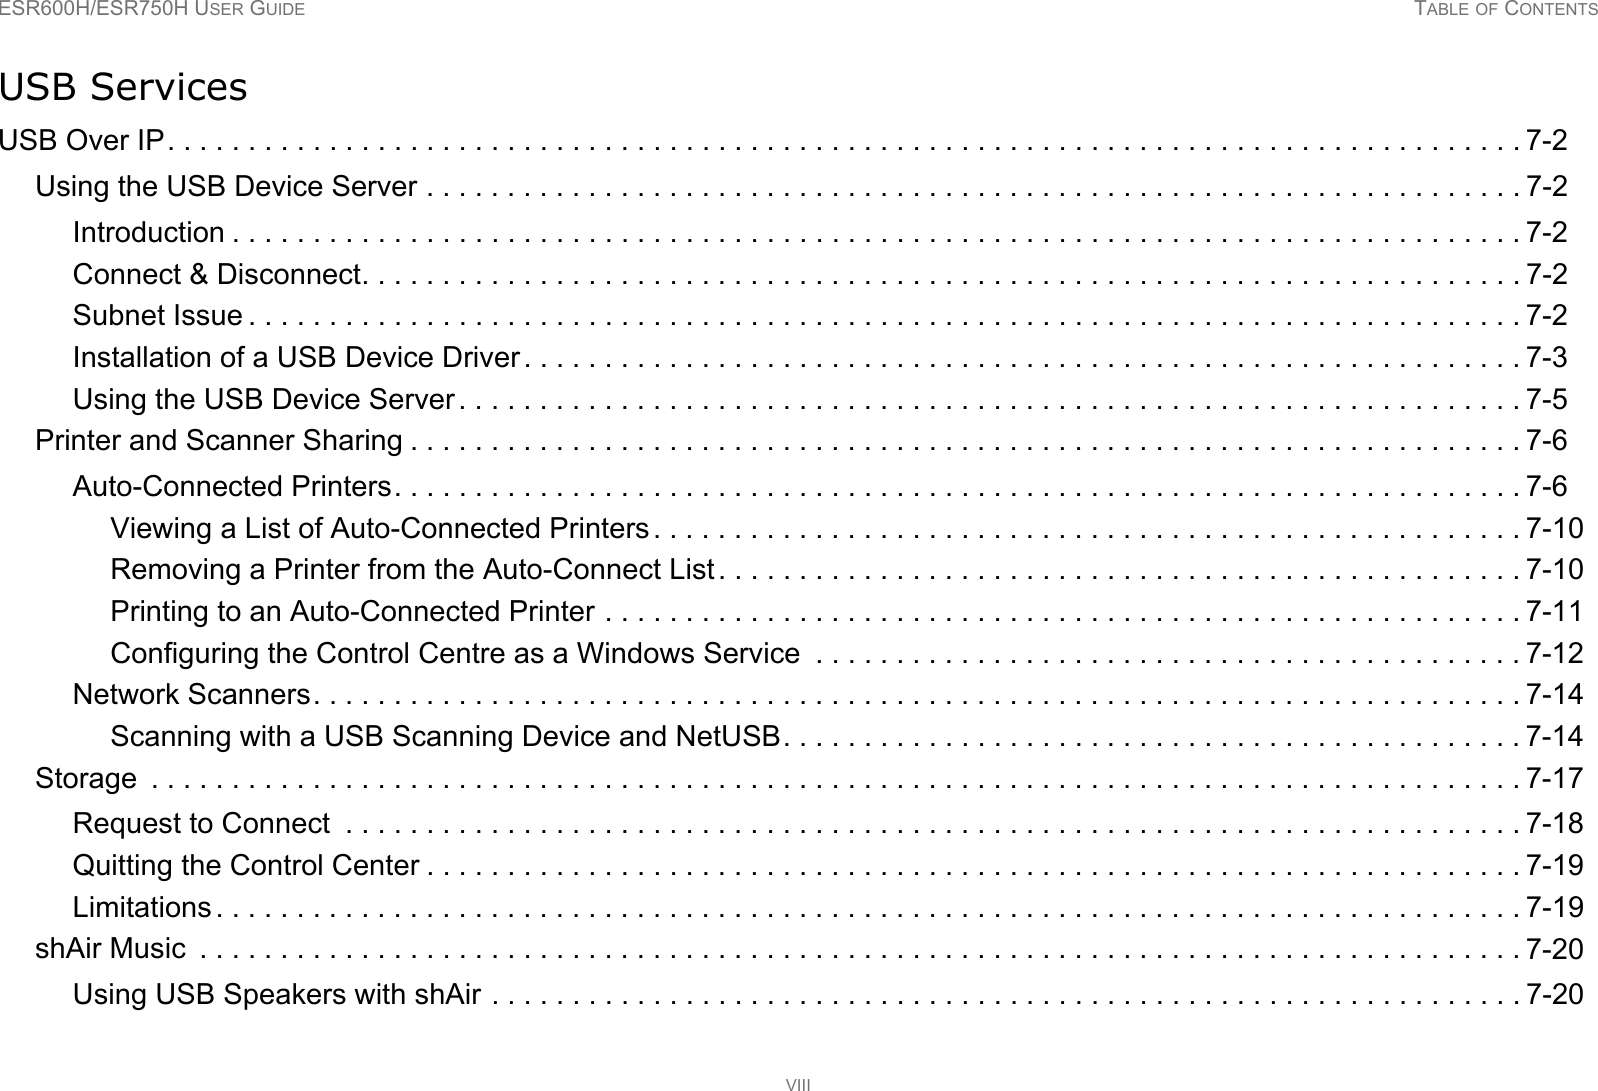 ESR600H/ESR750H USER GUIDE TABLE OF CONTENTSVIIIUSB ServicesUSB Over IP. . . . . . . . . . . . . . . . . . . . . . . . . . . . . . . . . . . . . . . . . . . . . . . . . . . . . . . . . . . . . . . . . . . . . . . . . . . . . . . . . . . . 7-2Using the USB Device Server . . . . . . . . . . . . . . . . . . . . . . . . . . . . . . . . . . . . . . . . . . . . . . . . . . . . . . . . . . . . . . . . . . . . 7-2Introduction . . . . . . . . . . . . . . . . . . . . . . . . . . . . . . . . . . . . . . . . . . . . . . . . . . . . . . . . . . . . . . . . . . . . . . . . . . . . . . . . 7-2Connect &amp; Disconnect. . . . . . . . . . . . . . . . . . . . . . . . . . . . . . . . . . . . . . . . . . . . . . . . . . . . . . . . . . . . . . . . . . . . . . . . 7-2Subnet Issue . . . . . . . . . . . . . . . . . . . . . . . . . . . . . . . . . . . . . . . . . . . . . . . . . . . . . . . . . . . . . . . . . . . . . . . . . . . . . . . 7-2Installation of a USB Device Driver . . . . . . . . . . . . . . . . . . . . . . . . . . . . . . . . . . . . . . . . . . . . . . . . . . . . . . . . . . . . . . 7-3Using the USB Device Server . . . . . . . . . . . . . . . . . . . . . . . . . . . . . . . . . . . . . . . . . . . . . . . . . . . . . . . . . . . . . . . . . . 7-5Printer and Scanner Sharing . . . . . . . . . . . . . . . . . . . . . . . . . . . . . . . . . . . . . . . . . . . . . . . . . . . . . . . . . . . . . . . . . . . . . 7-6Auto-Connected Printers. . . . . . . . . . . . . . . . . . . . . . . . . . . . . . . . . . . . . . . . . . . . . . . . . . . . . . . . . . . . . . . . . . . . . . 7-6Viewing a List of Auto-Connected Printers. . . . . . . . . . . . . . . . . . . . . . . . . . . . . . . . . . . . . . . . . . . . . . . . . . . . . . 7-10Removing a Printer from the Auto-Connect List. . . . . . . . . . . . . . . . . . . . . . . . . . . . . . . . . . . . . . . . . . . . . . . . . . 7-10Printing to an Auto-Connected Printer . . . . . . . . . . . . . . . . . . . . . . . . . . . . . . . . . . . . . . . . . . . . . . . . . . . . . . . . . 7-11Configuring the Control Centre as a Windows Service  . . . . . . . . . . . . . . . . . . . . . . . . . . . . . . . . . . . . . . . . . . . . 7-12Network Scanners. . . . . . . . . . . . . . . . . . . . . . . . . . . . . . . . . . . . . . . . . . . . . . . . . . . . . . . . . . . . . . . . . . . . . . . . . . . 7-14Scanning with a USB Scanning Device and NetUSB. . . . . . . . . . . . . . . . . . . . . . . . . . . . . . . . . . . . . . . . . . . . . . 7-14Storage  . . . . . . . . . . . . . . . . . . . . . . . . . . . . . . . . . . . . . . . . . . . . . . . . . . . . . . . . . . . . . . . . . . . . . . . . . . . . . . . . . . . . . 7-17Request to Connect  . . . . . . . . . . . . . . . . . . . . . . . . . . . . . . . . . . . . . . . . . . . . . . . . . . . . . . . . . . . . . . . . . . . . . . . . . 7-18Quitting the Control Center . . . . . . . . . . . . . . . . . . . . . . . . . . . . . . . . . . . . . . . . . . . . . . . . . . . . . . . . . . . . . . . . . . . . 7-19Limitations . . . . . . . . . . . . . . . . . . . . . . . . . . . . . . . . . . . . . . . . . . . . . . . . . . . . . . . . . . . . . . . . . . . . . . . . . . . . . . . . . 7-19shAir Music  . . . . . . . . . . . . . . . . . . . . . . . . . . . . . . . . . . . . . . . . . . . . . . . . . . . . . . . . . . . . . . . . . . . . . . . . . . . . . . . . . . 7-20Using USB Speakers with shAir . . . . . . . . . . . . . . . . . . . . . . . . . . . . . . . . . . . . . . . . . . . . . . . . . . . . . . . . . . . . . . . . 7-20